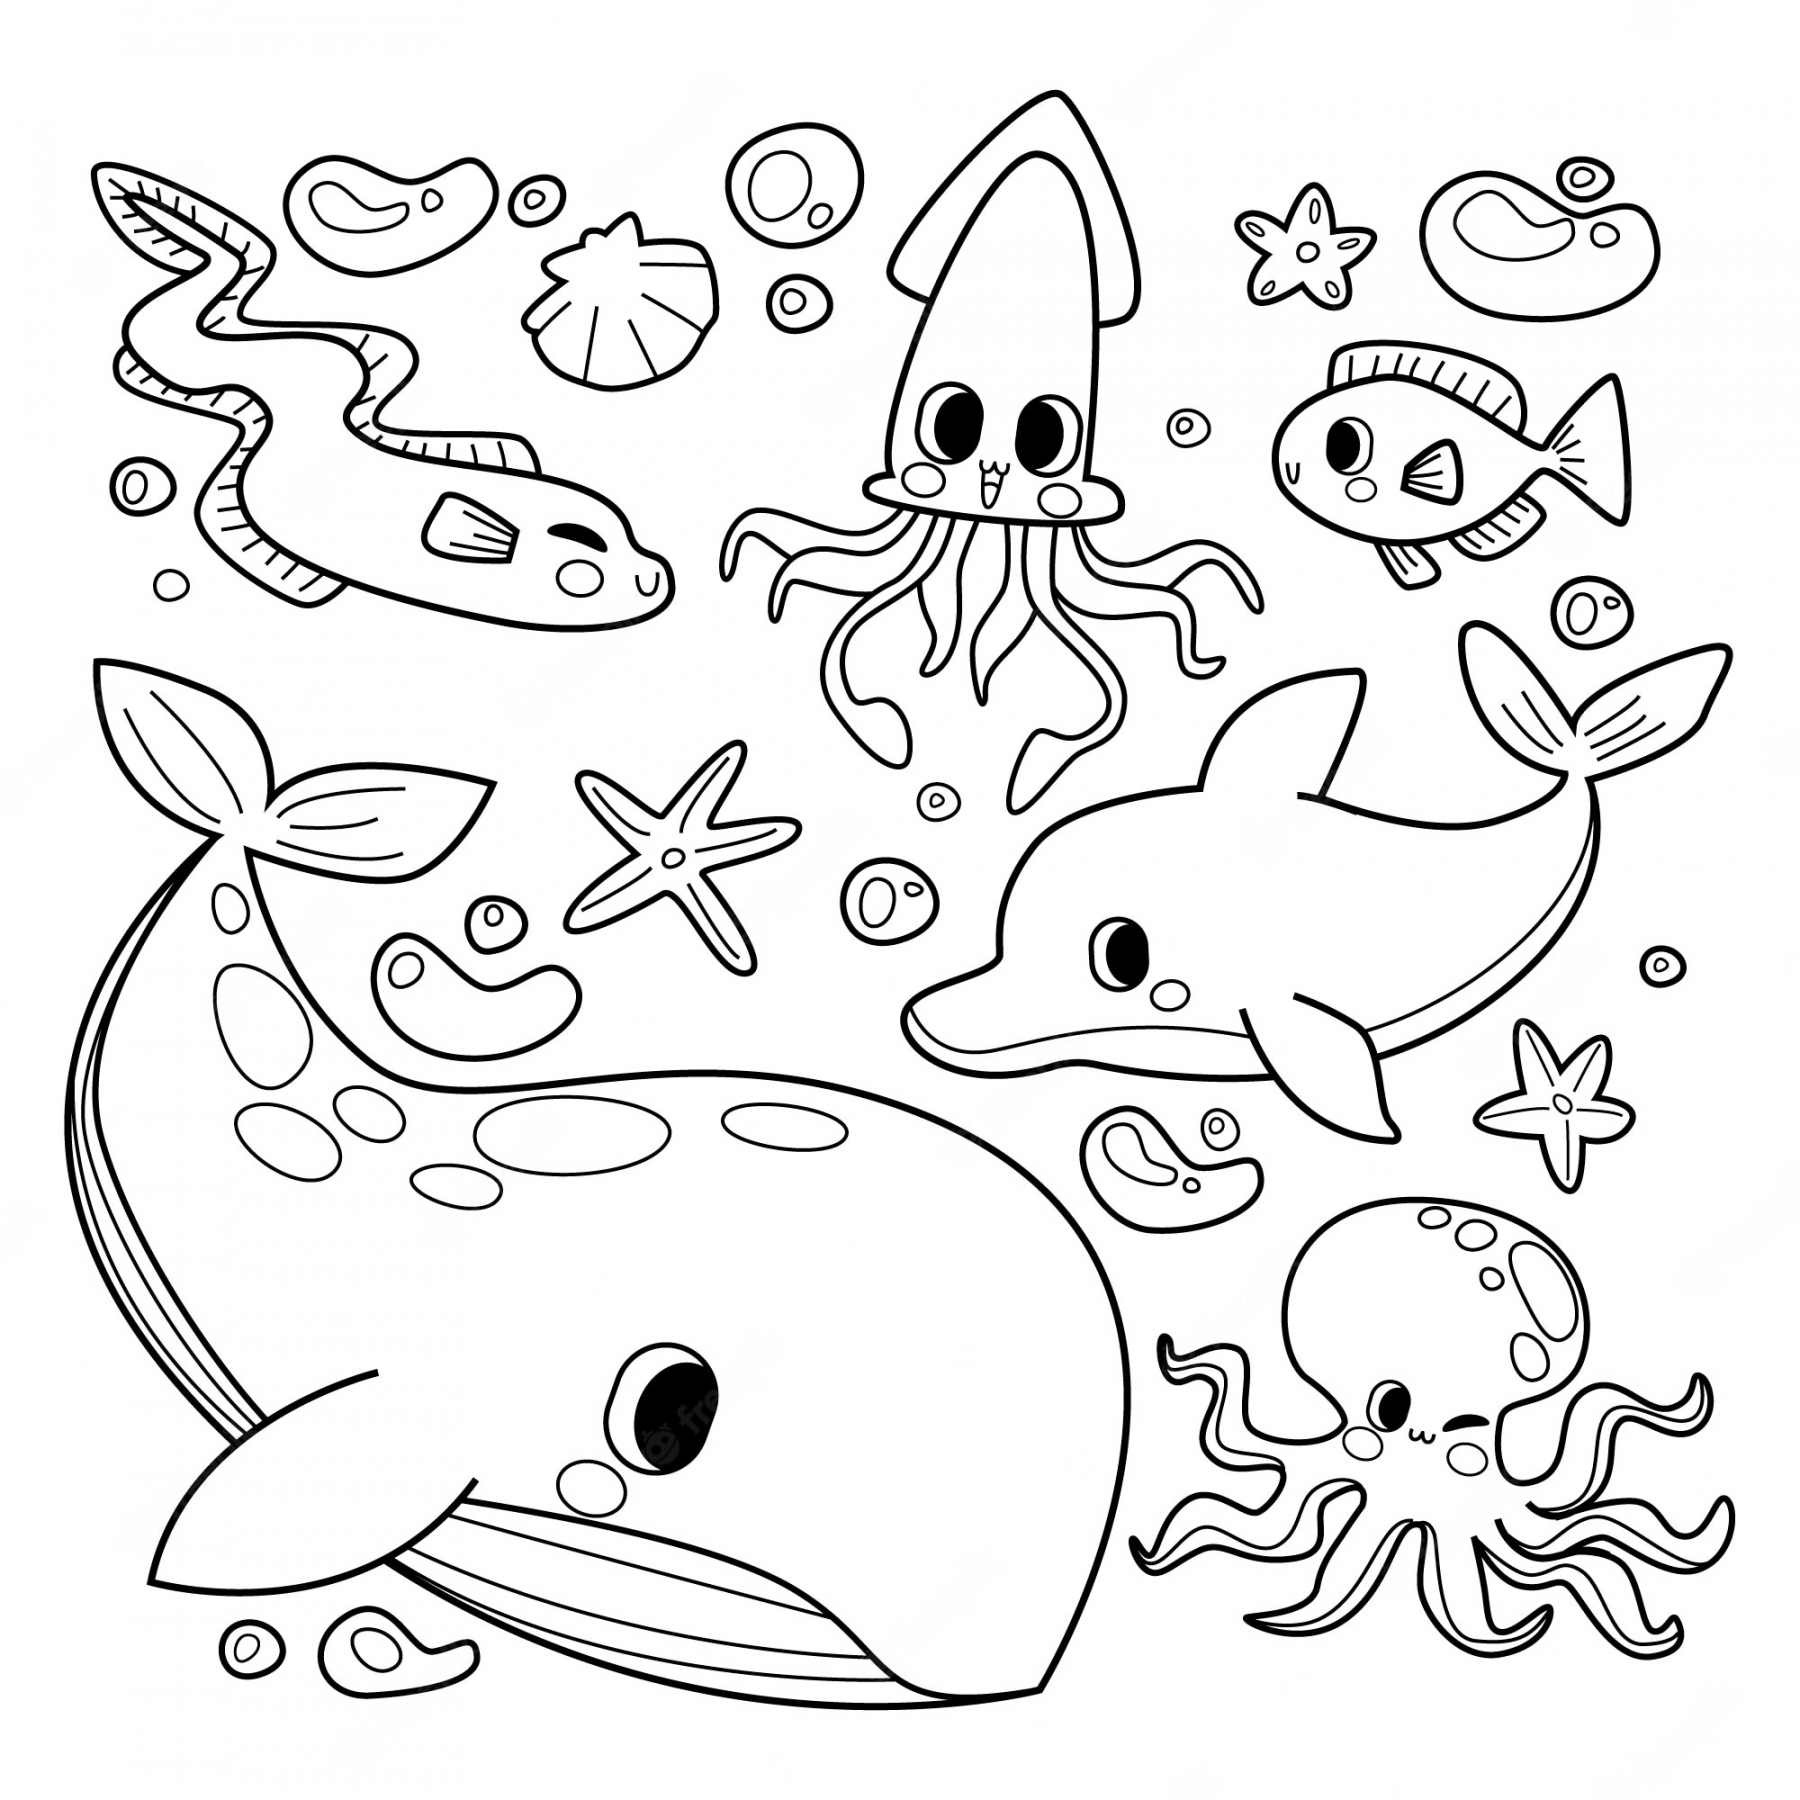 Printable Free Coloring Pages - Printable - Coloring Pages Images - Free Download on Freepik